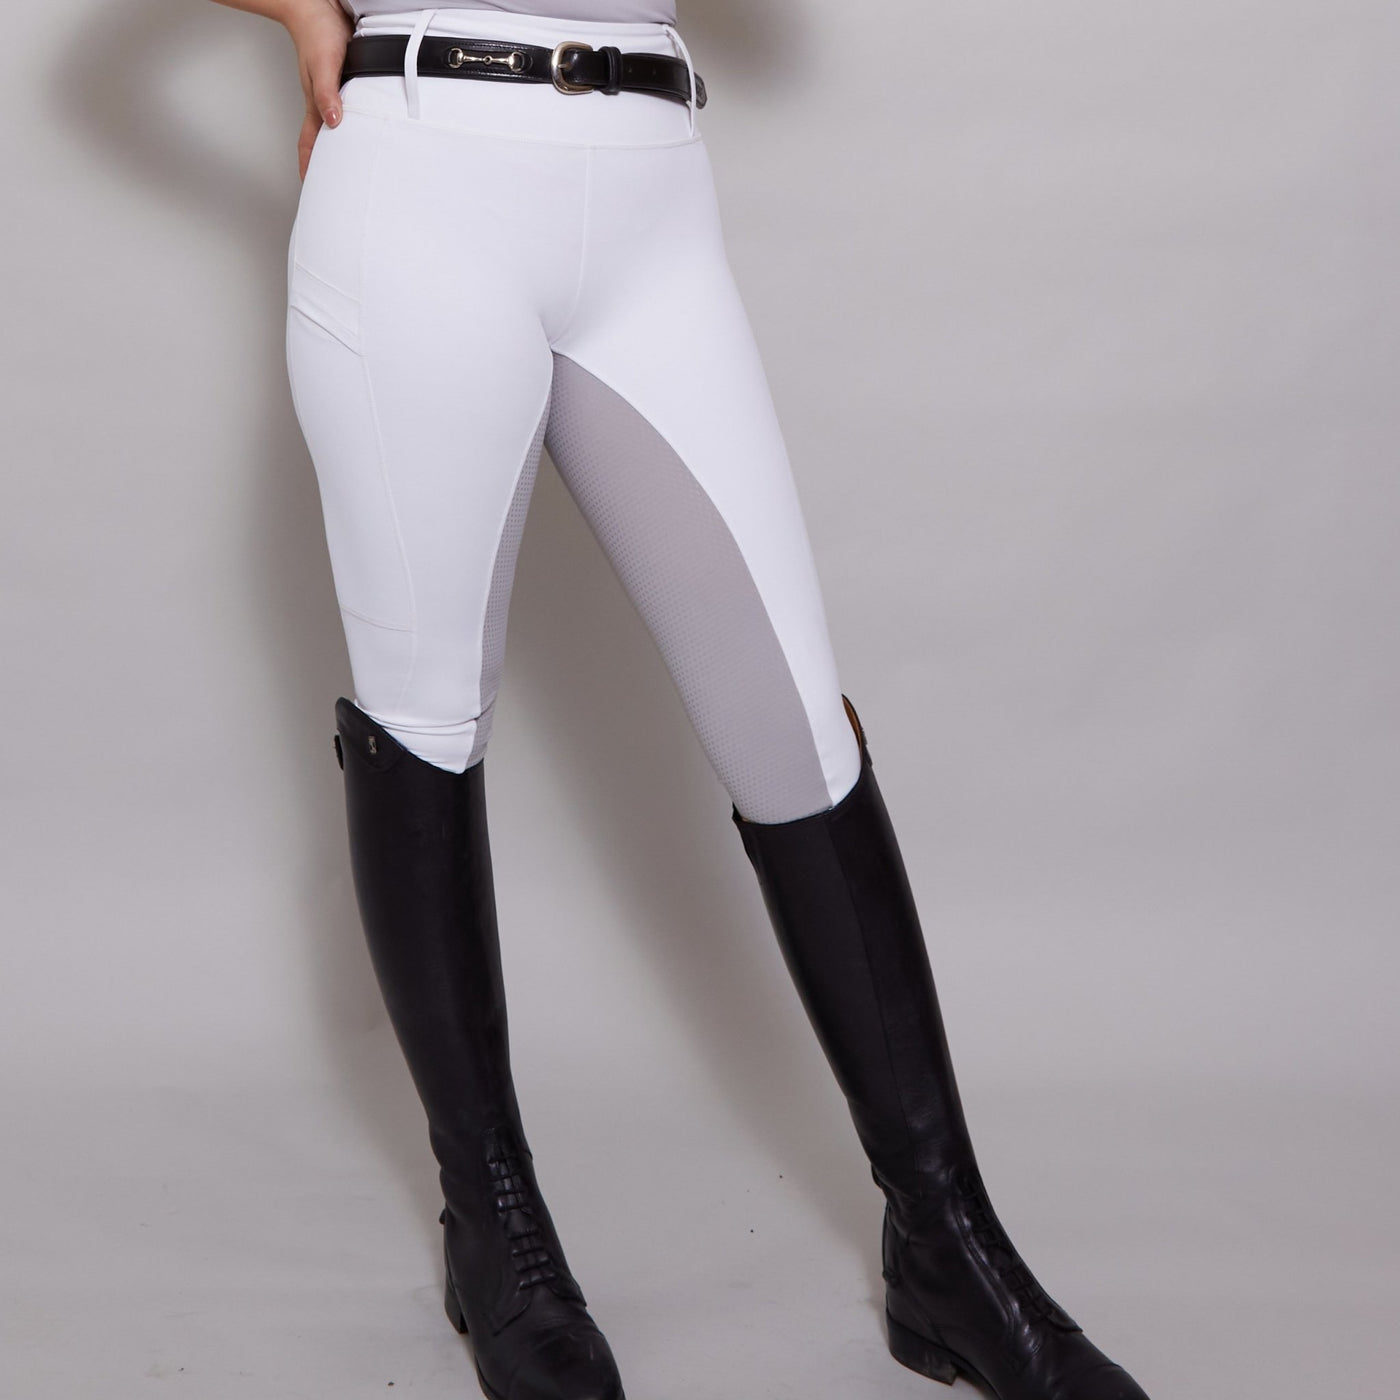 White Grey Competition Leggings